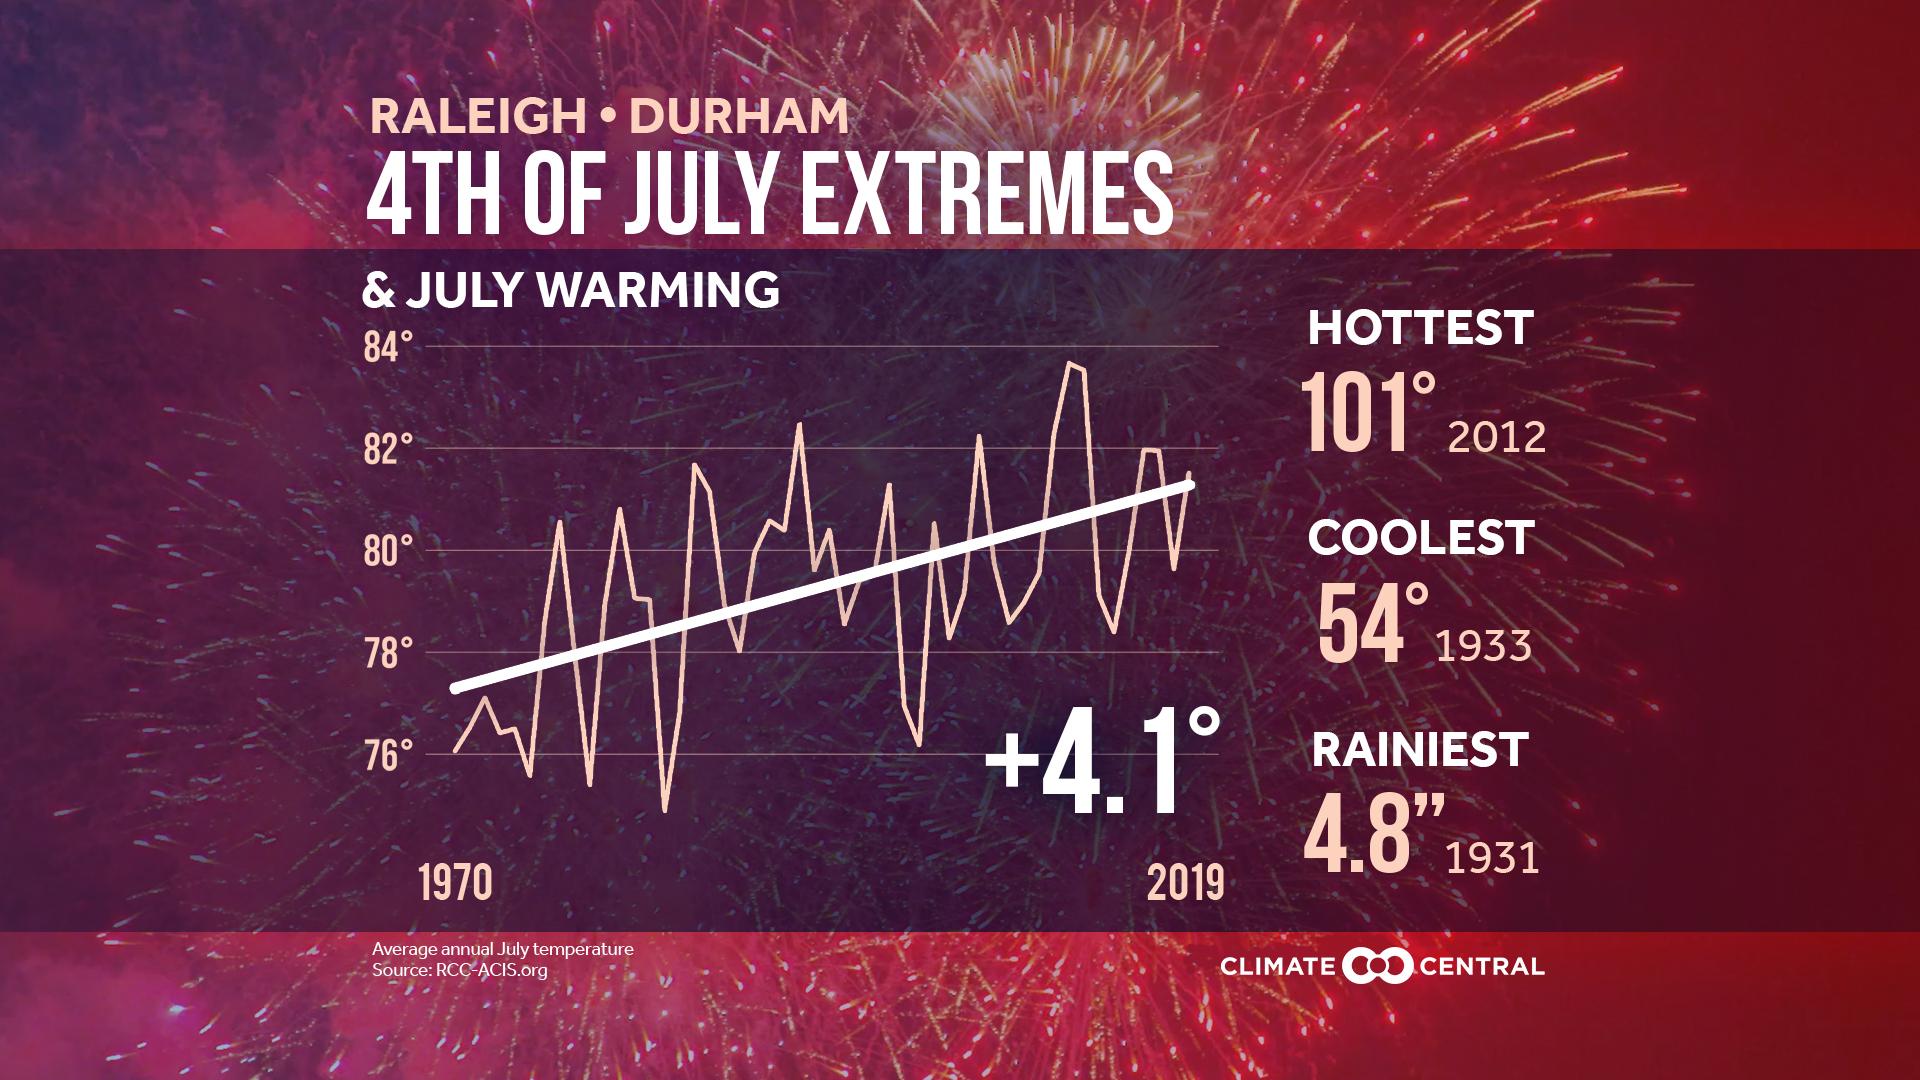 July 4th Extremes